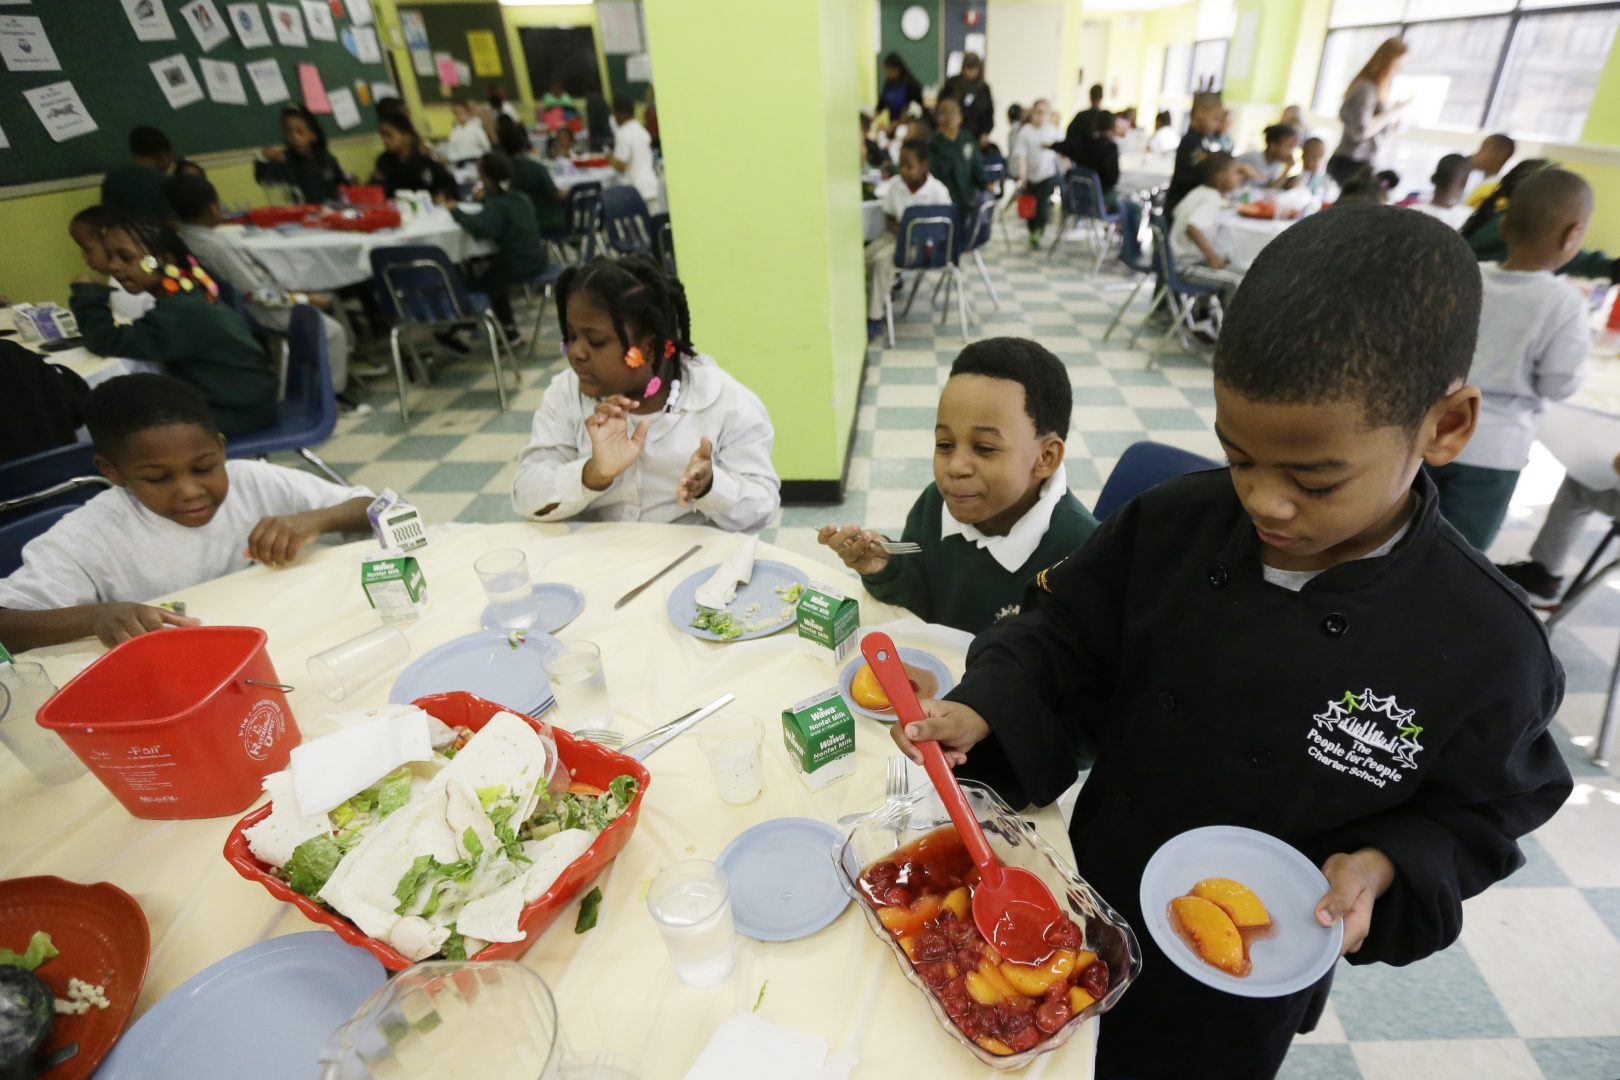 FILE PHOTO: A student serves up desert to classmates during lunch at the People for People Charter School, Monday, Feb. 25, 2013, in Philadelphia. 